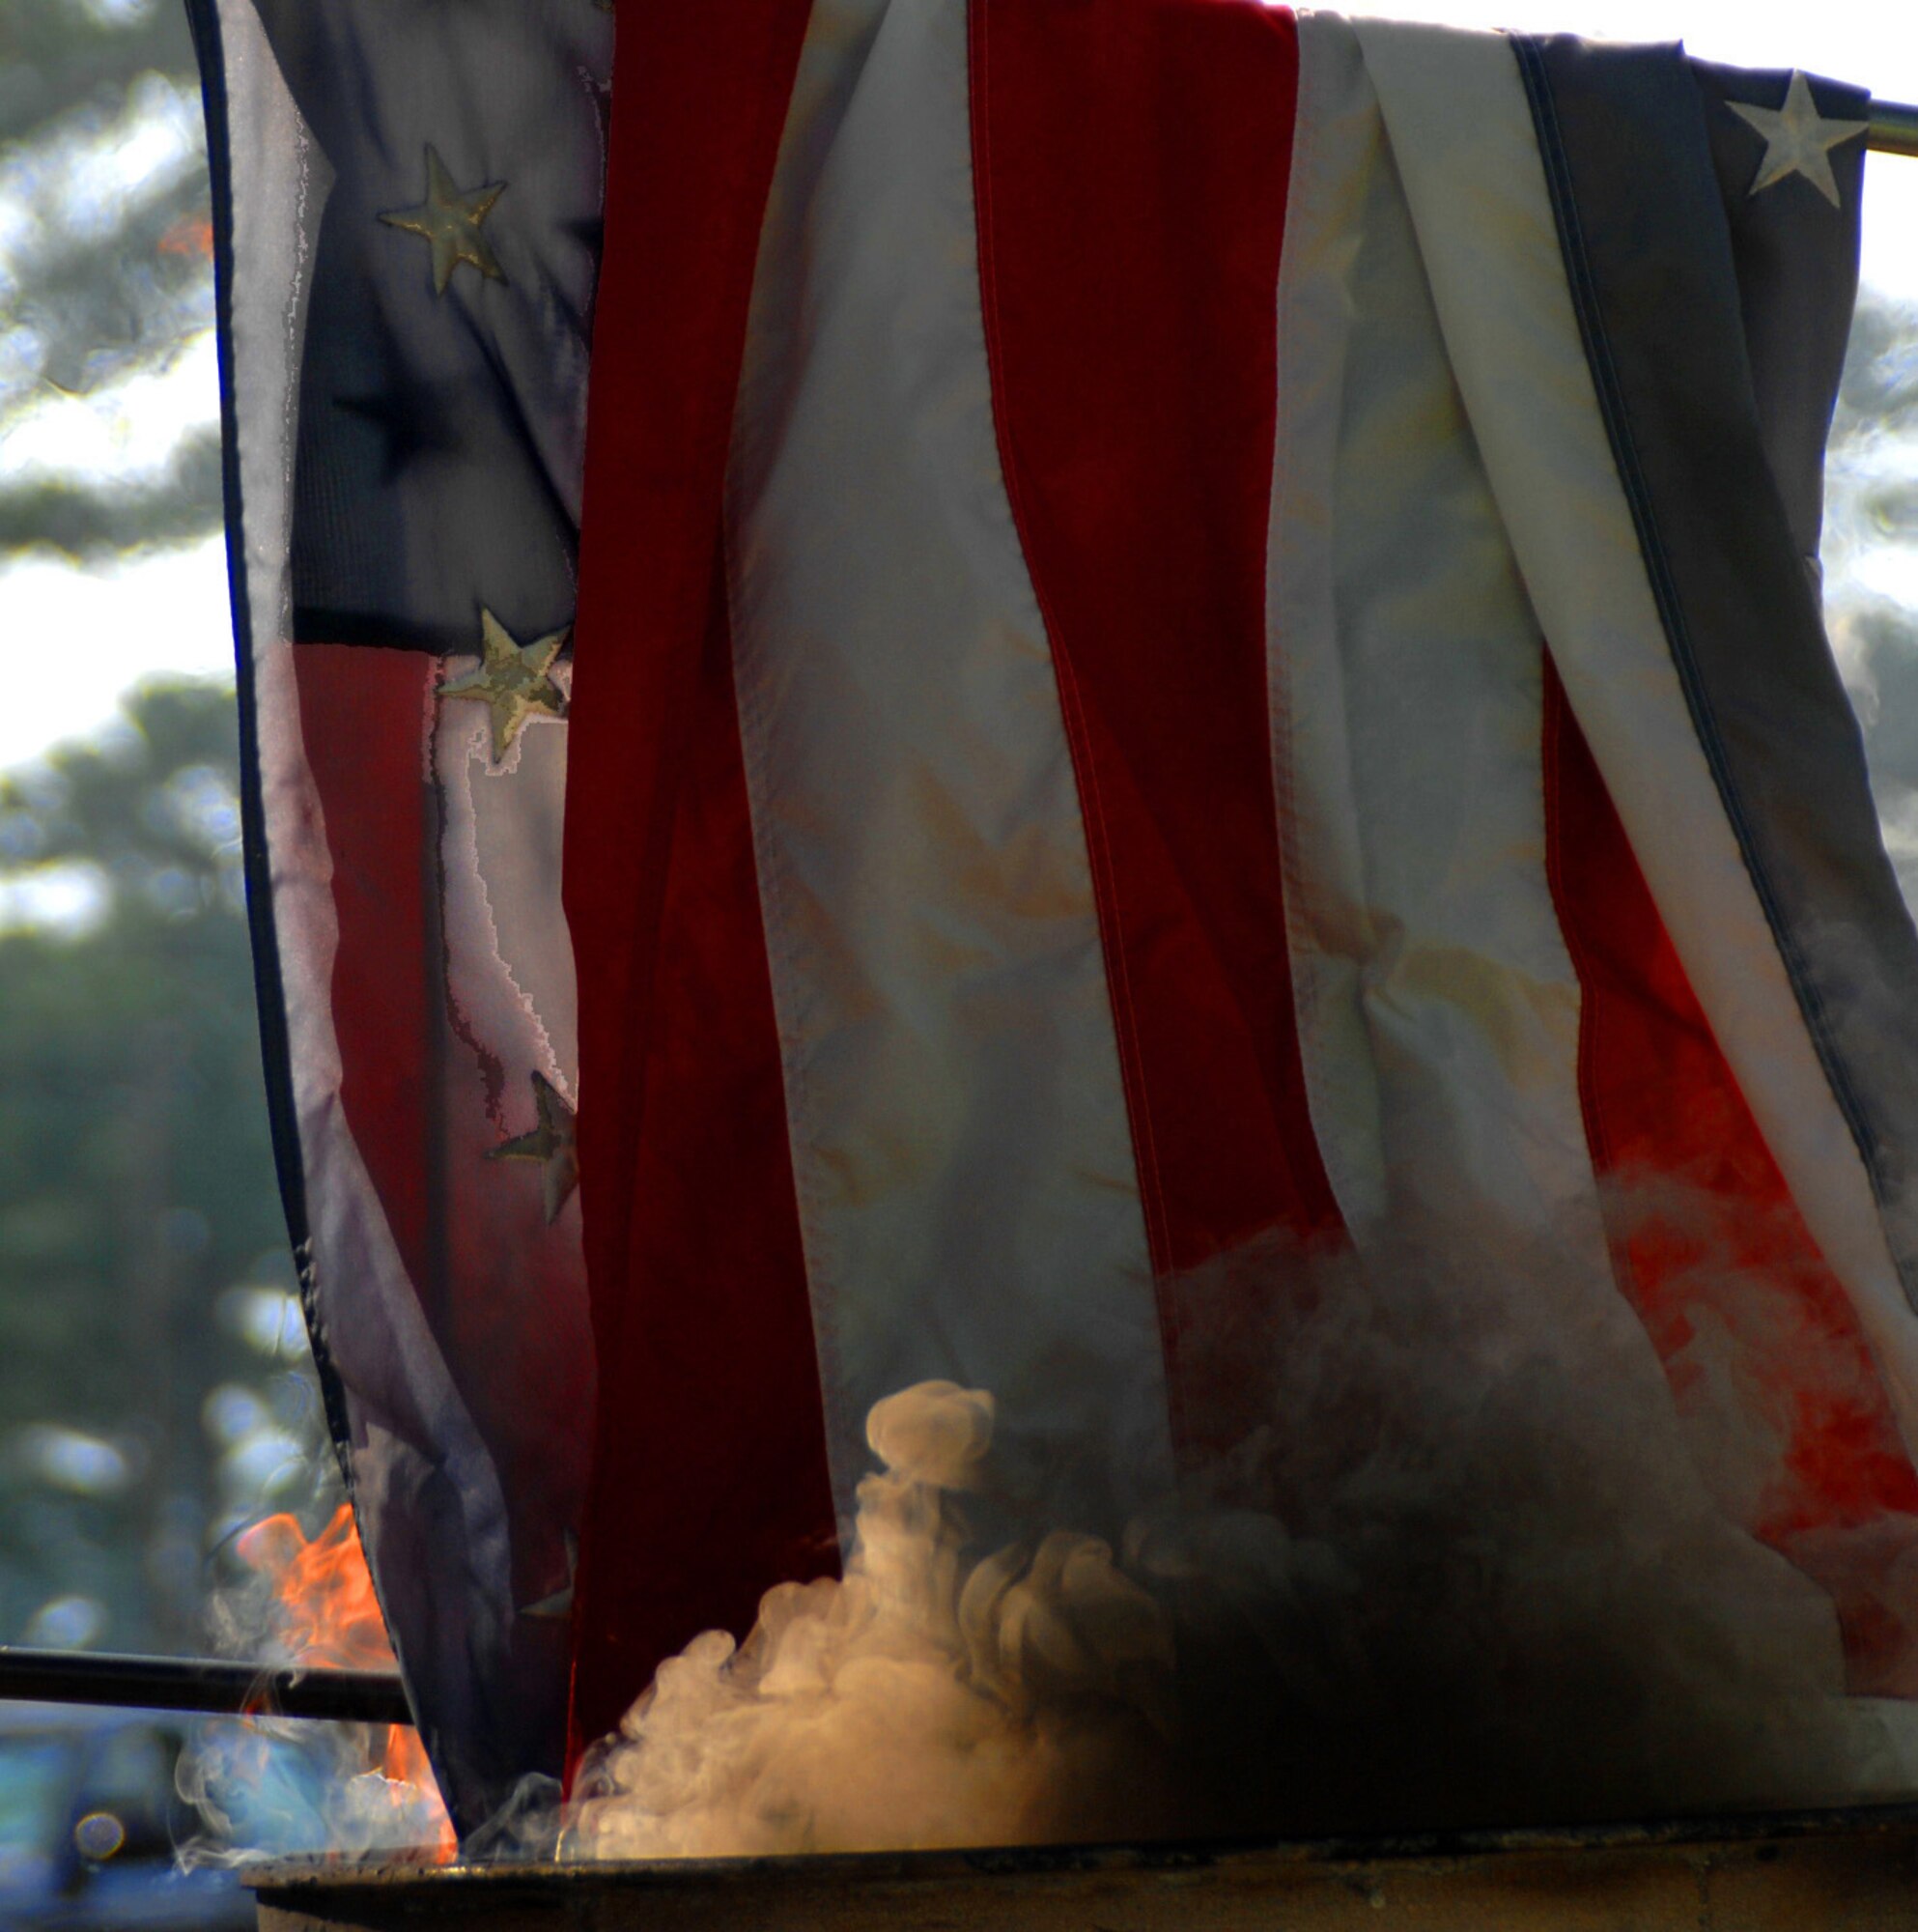 SEYMOUR JOHNSON AIR FORCE BASE, N.C. - A worn, tattered American flag is ceremoniously burned, June 14, 2008. U.S. flags were burned as part of a flag retirement ceremony, which shows respect and honor to the flags being retired. (U.S. Air Force photo by Airman 1st Class Makenzie R. Lang)